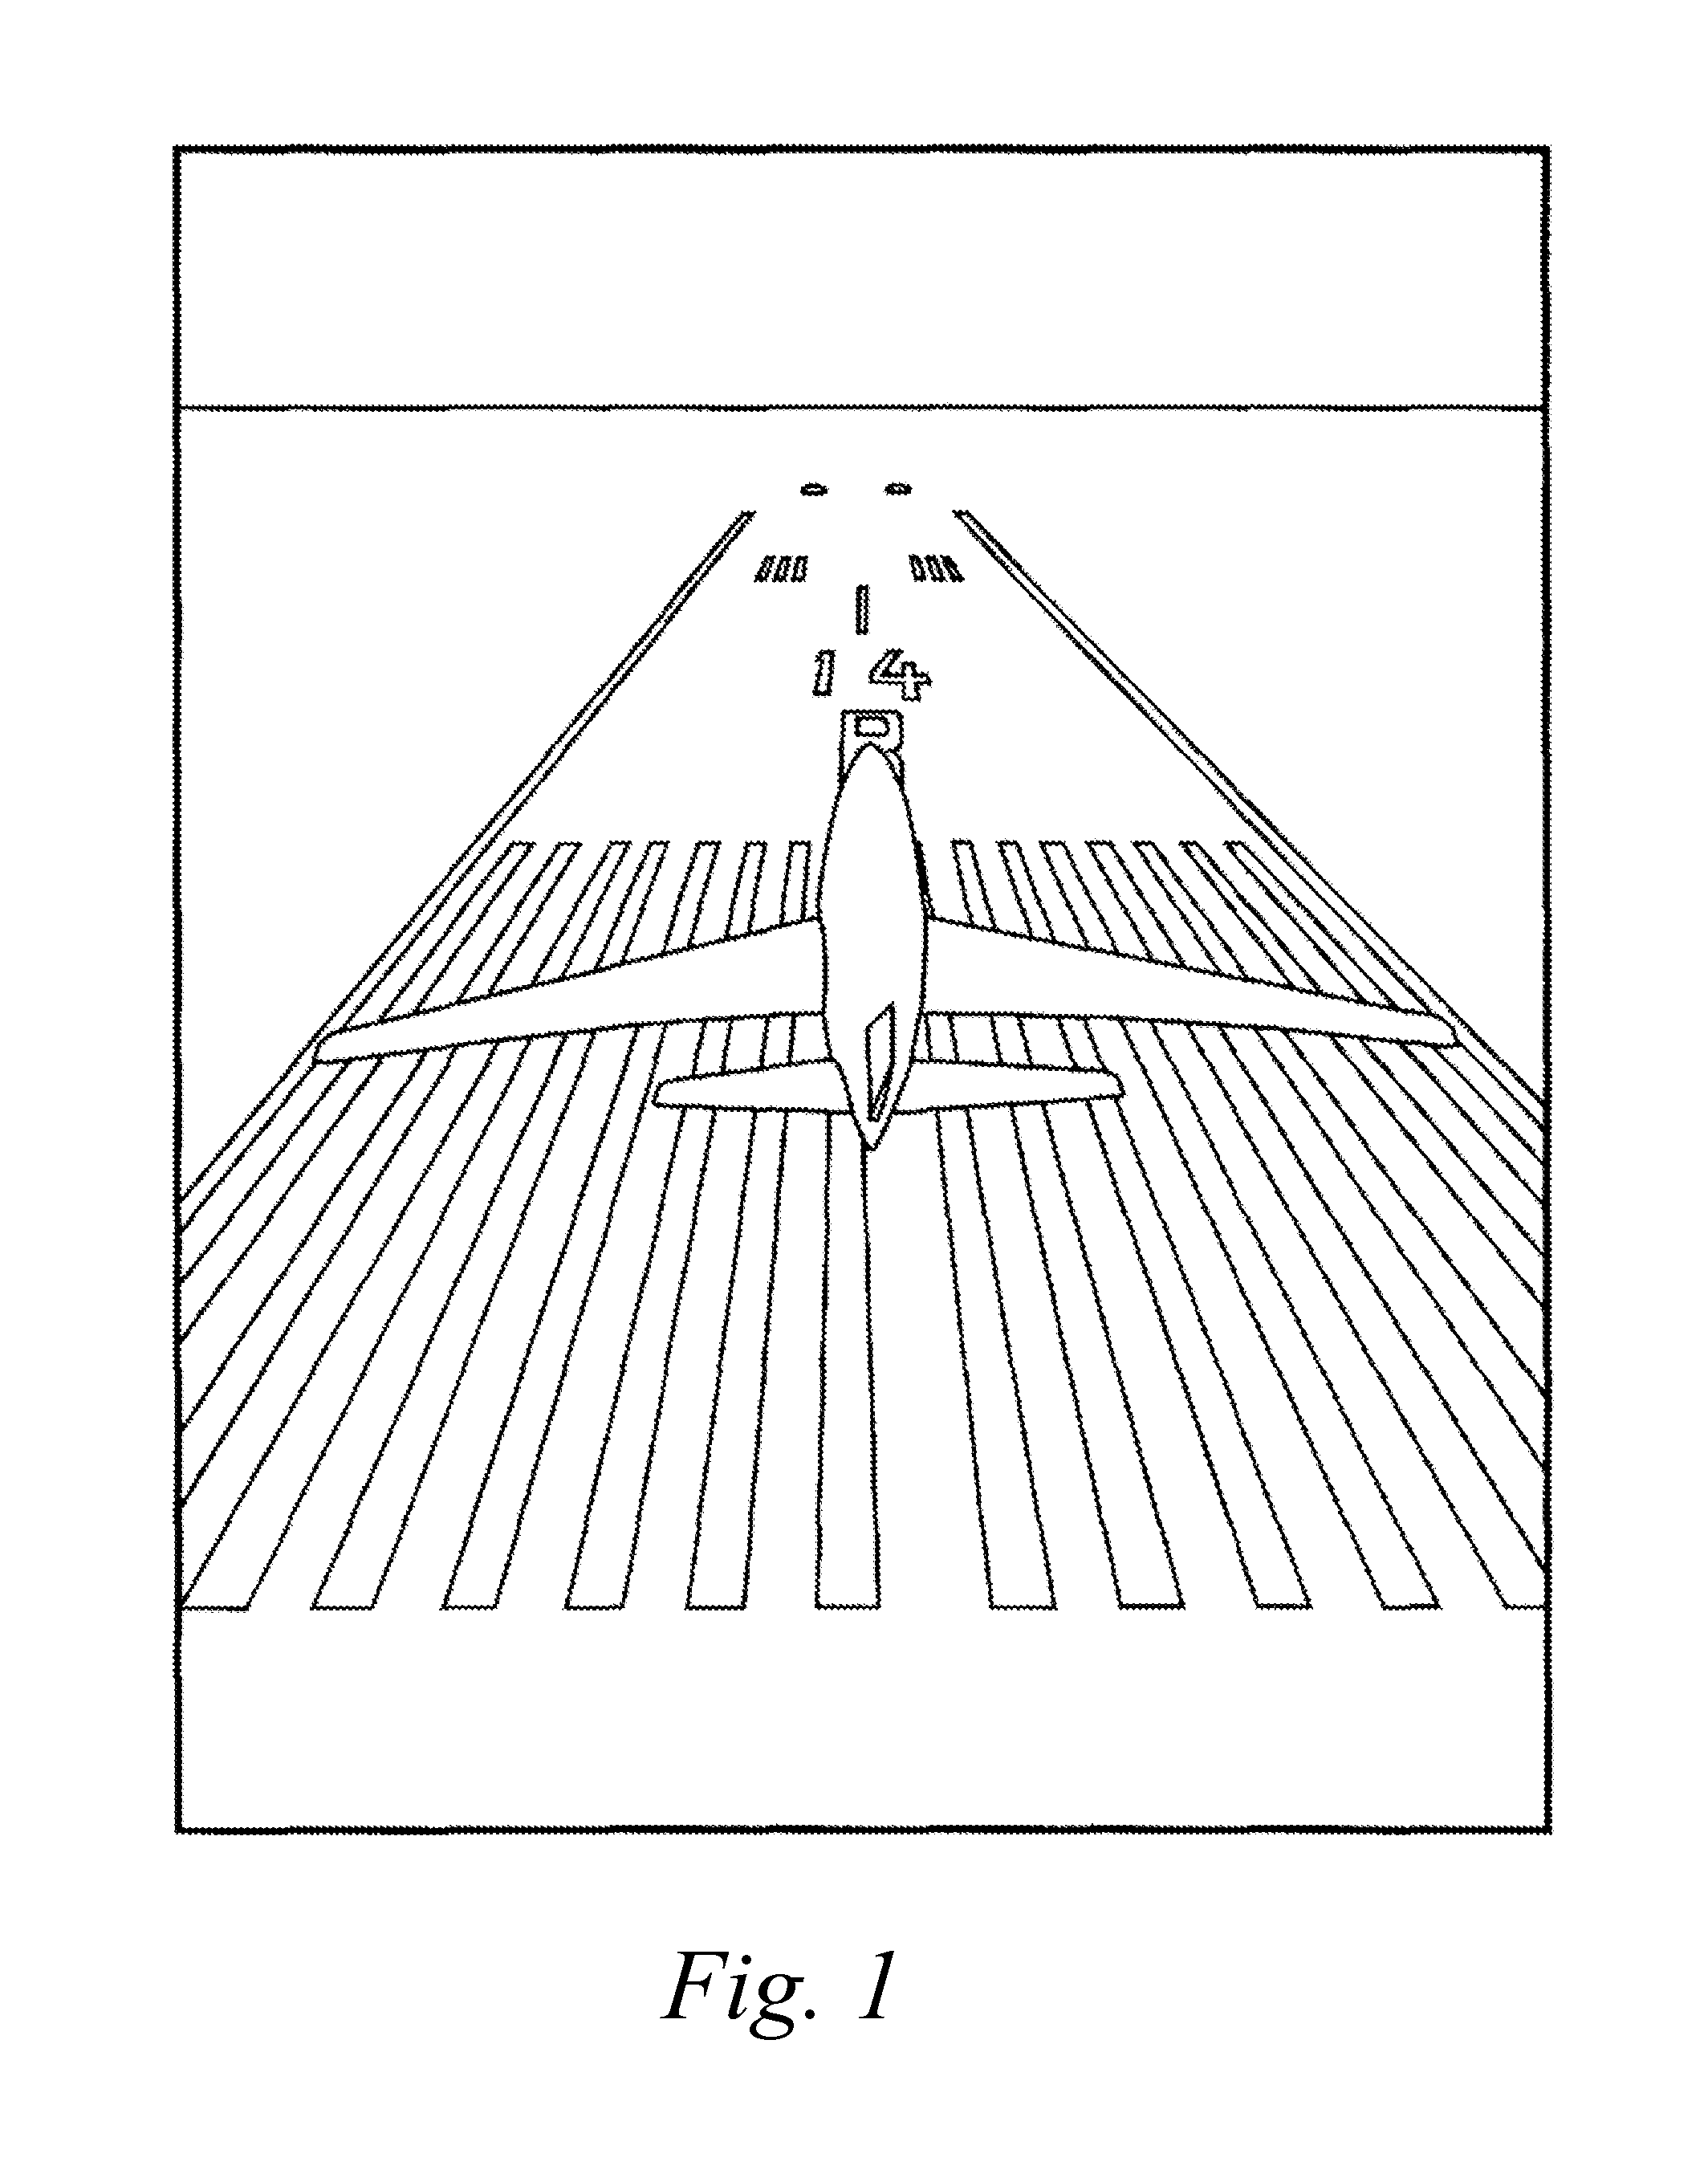 Systems and methods for providing aircraft runway guidance